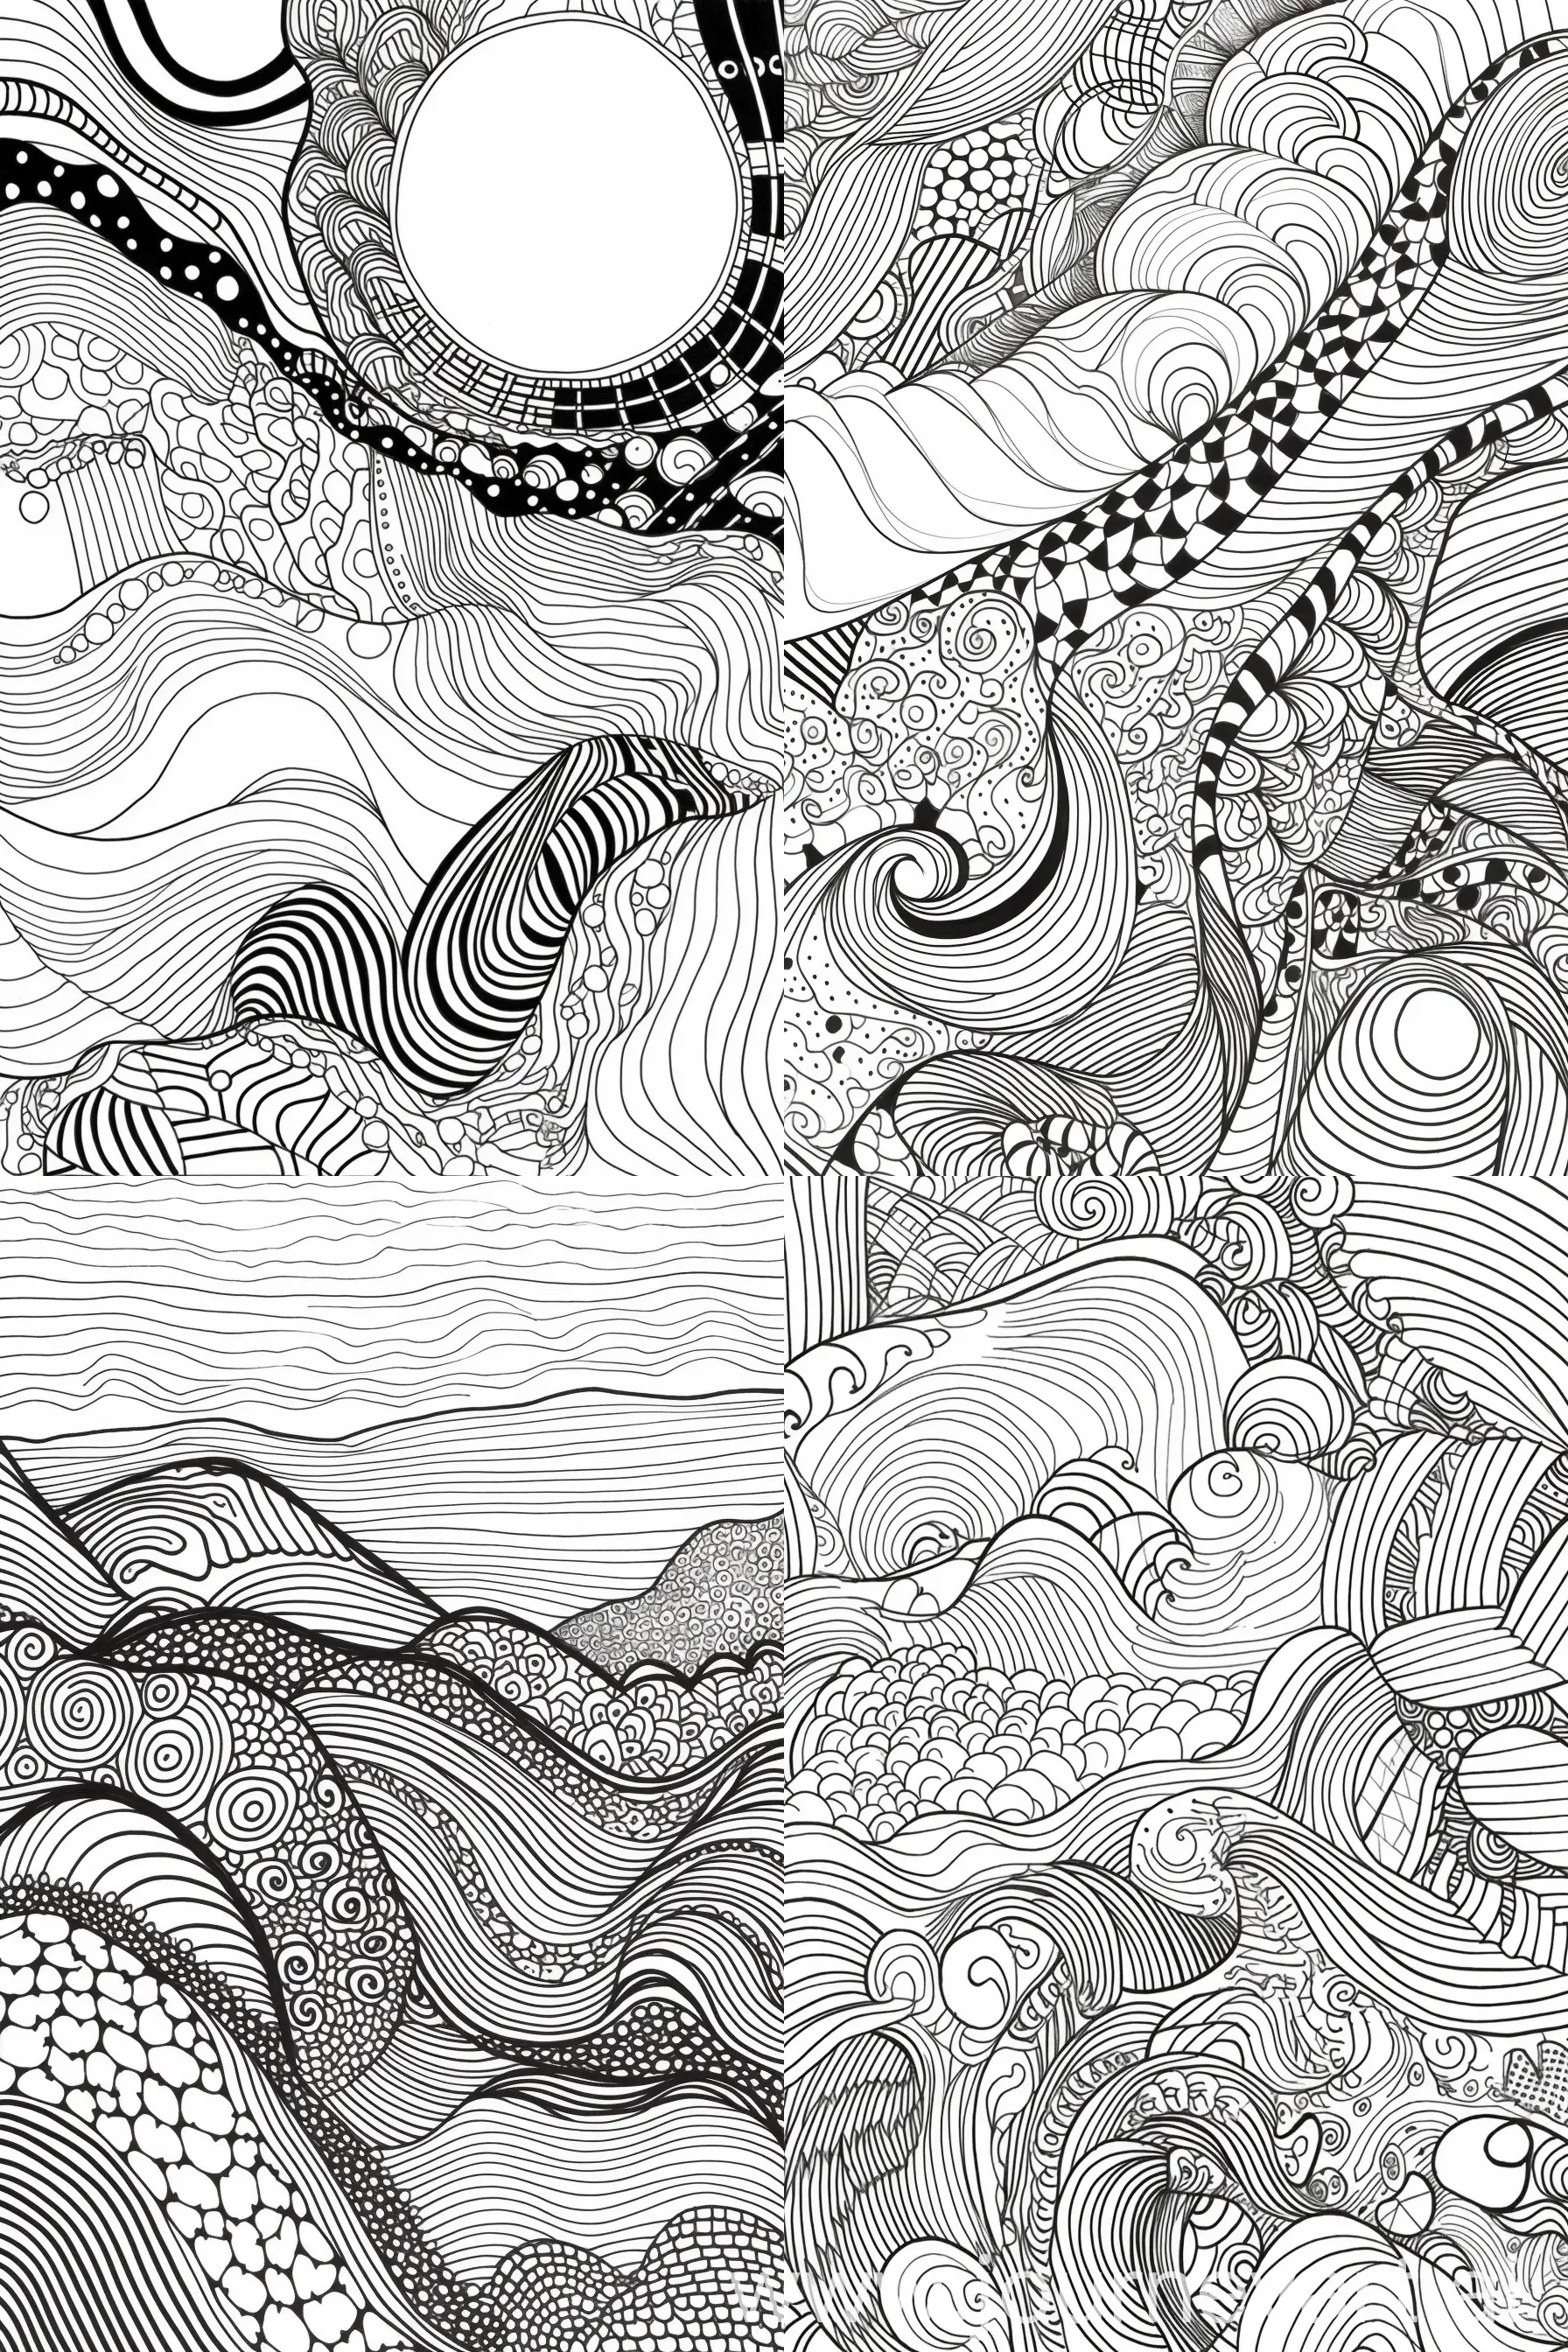 Zentangle-Desert-Coloring-Page-with-Swirls-and-Wavey-Lines